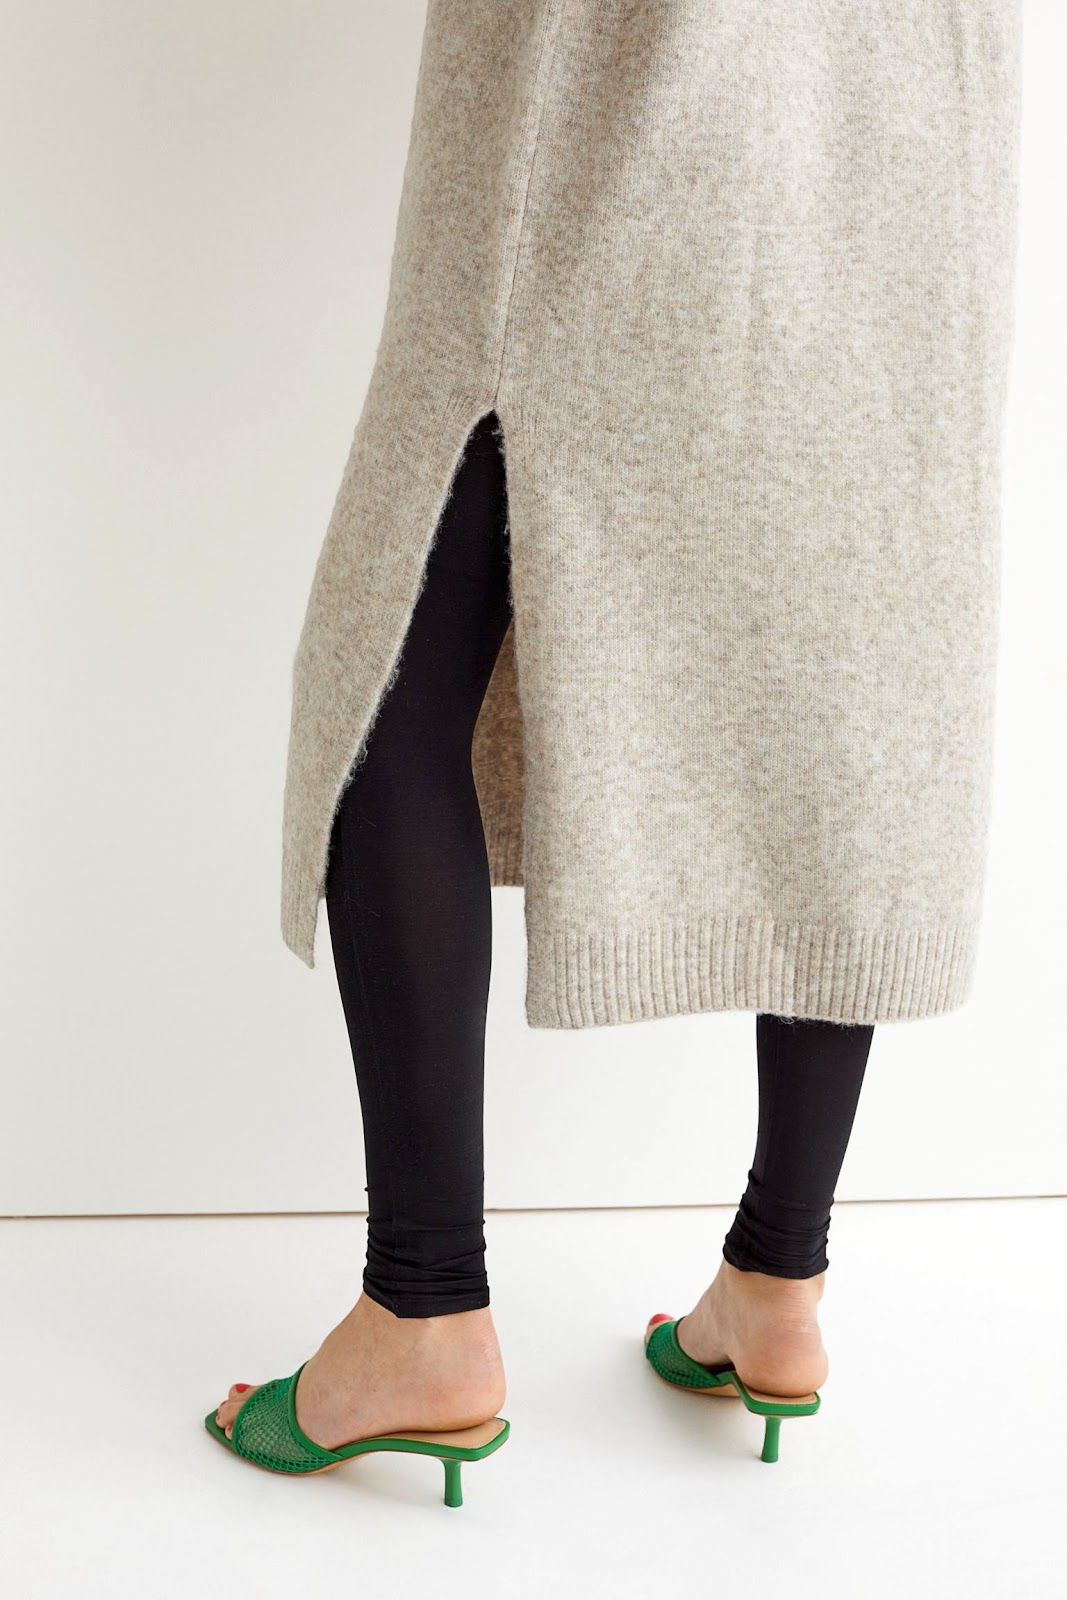 Easy Last Minute Holiday Party Outfit Idea — Cozy Chic Minimalist Look With Long SweaterDress, Classic Black Leggings and Green Mesh Mule Heels